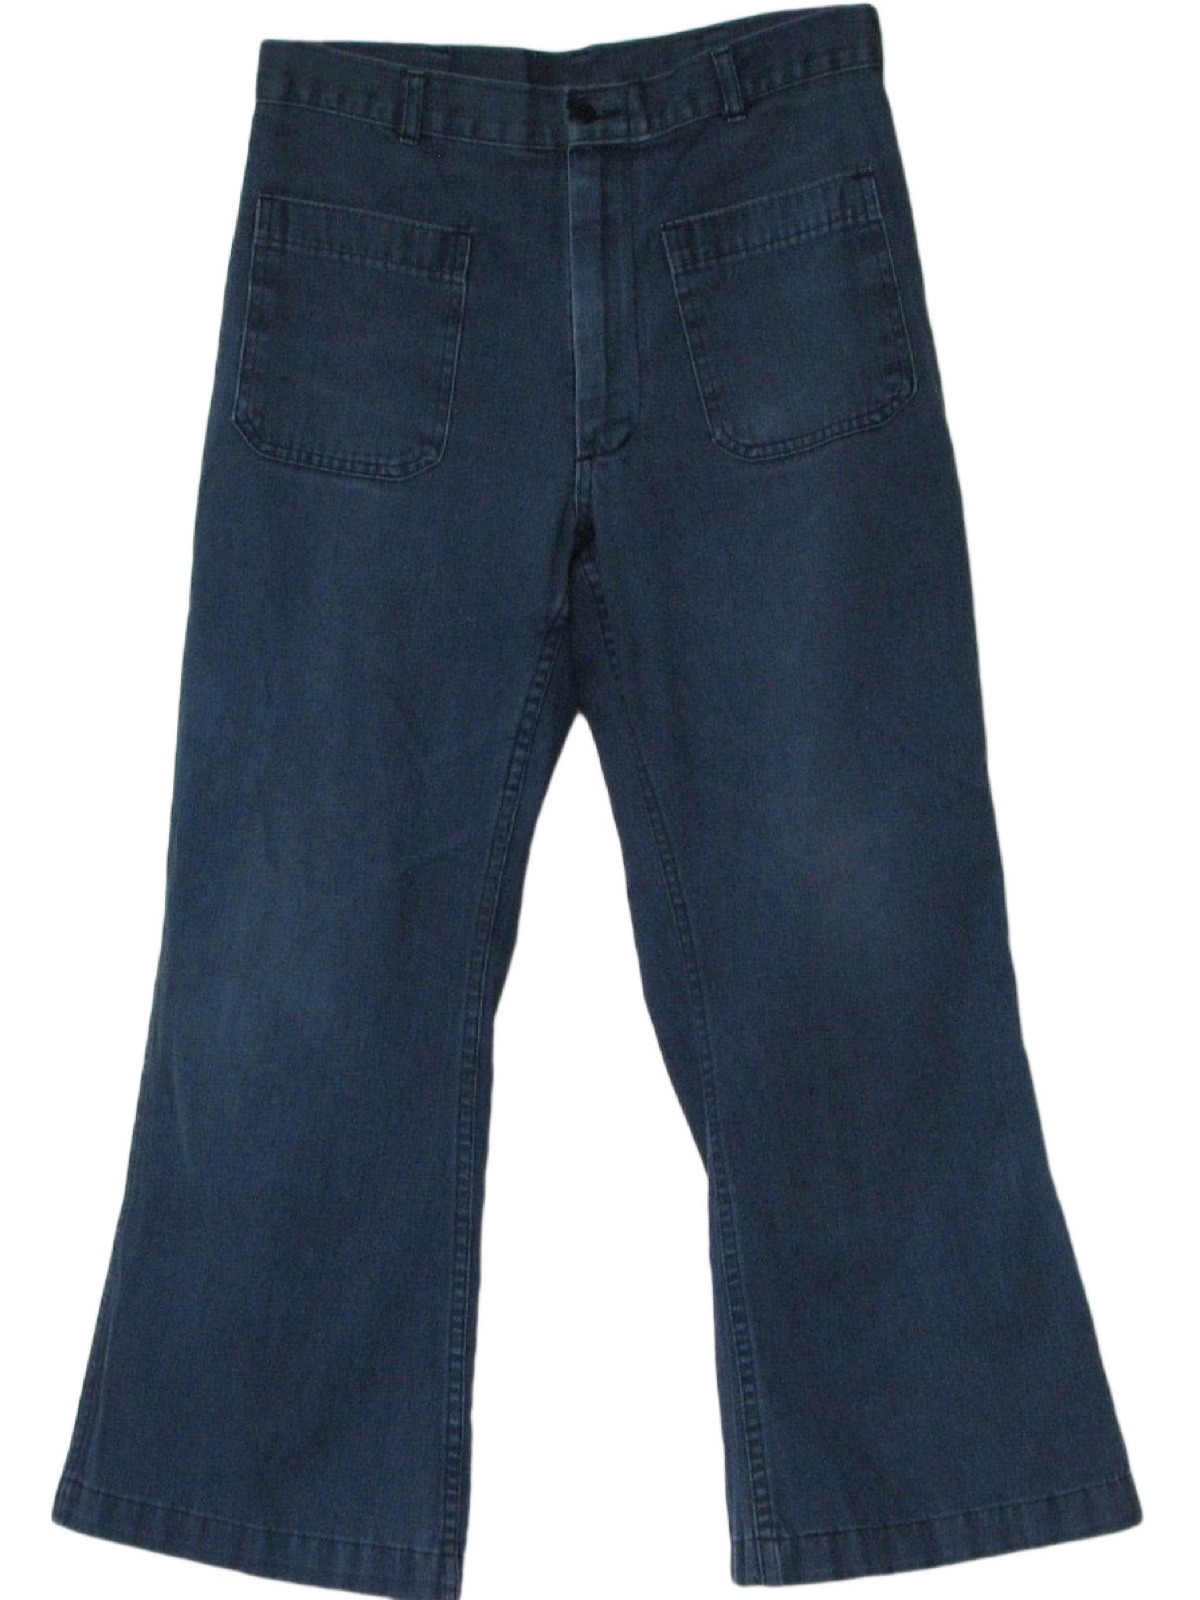 Retro 1970's Bellbottom Pants (Utility Trousers) : Early 70s -Utility ...